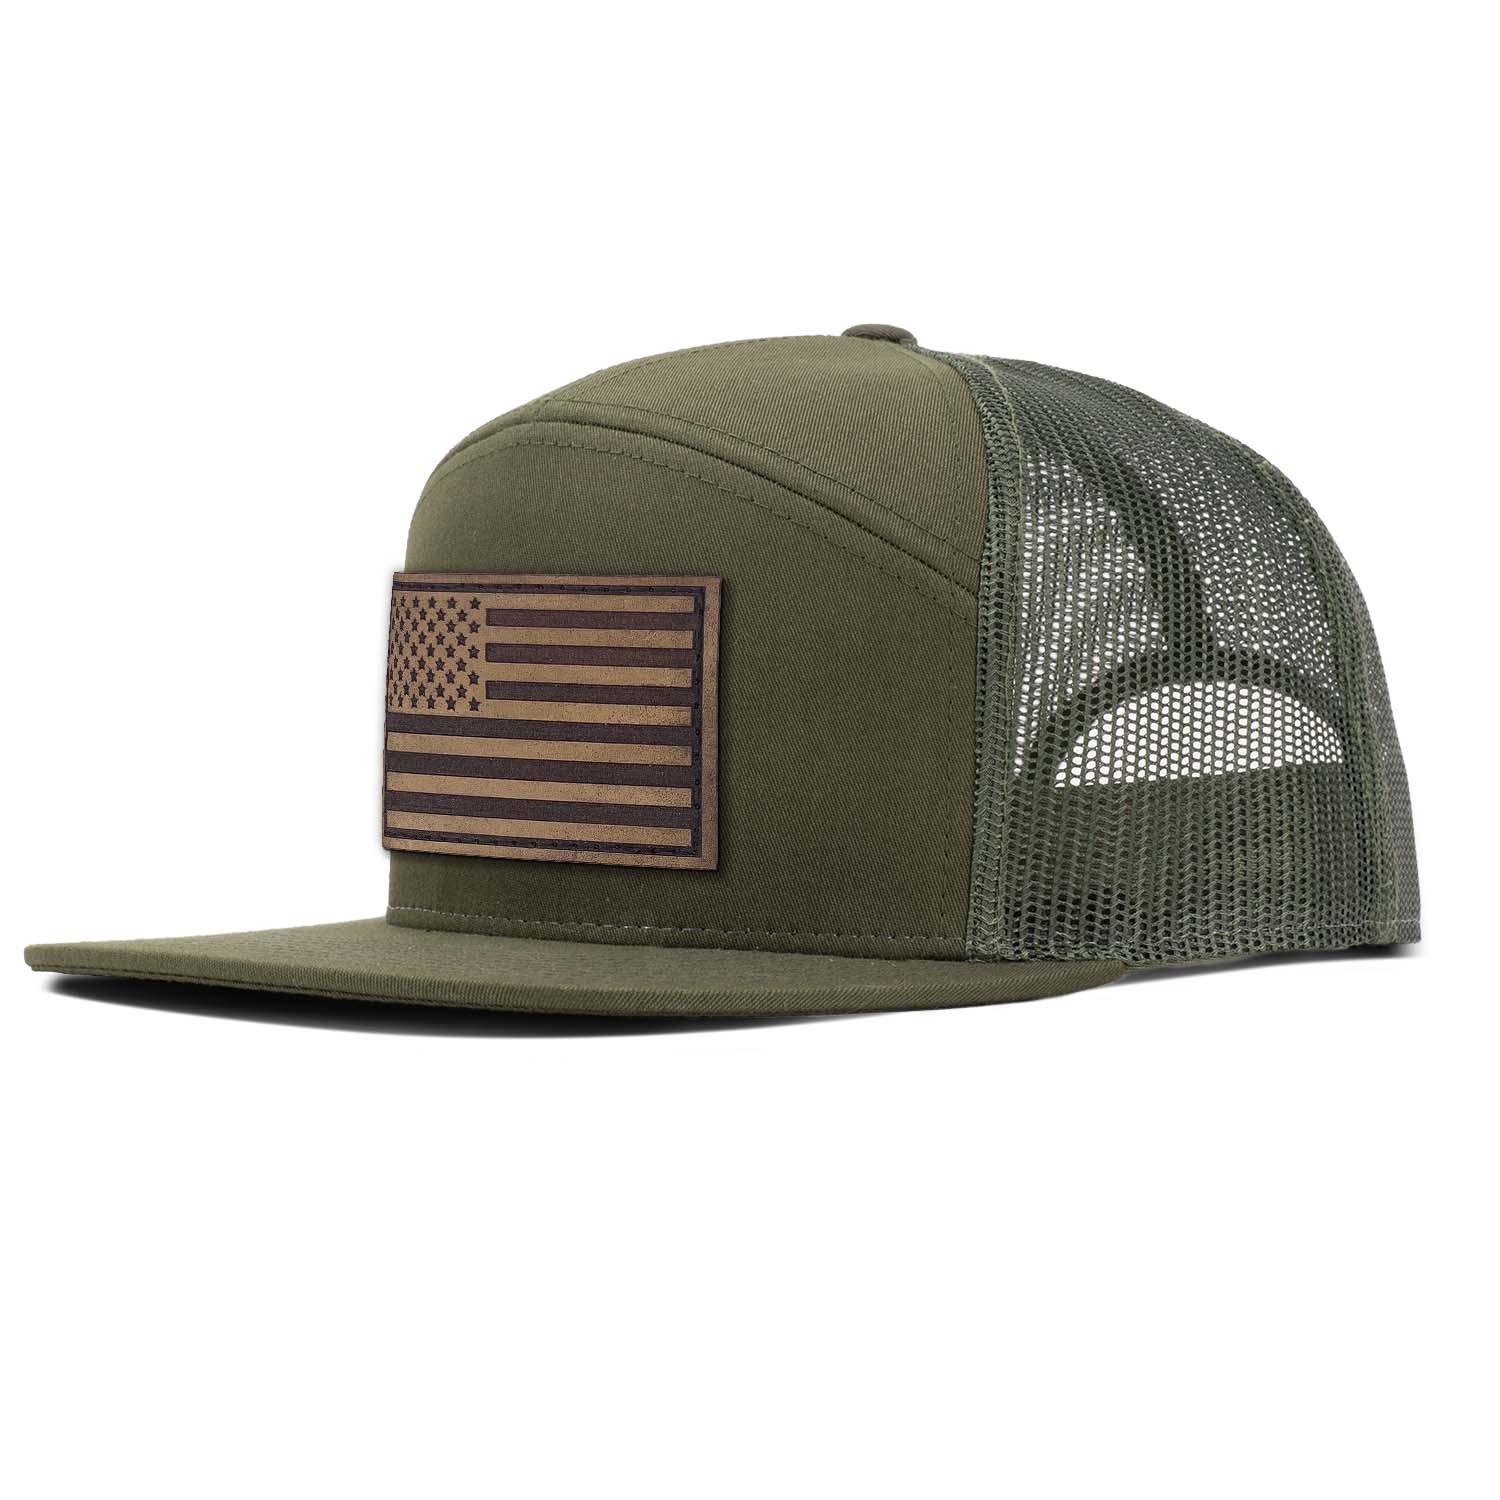 90020 - Leather Hat Patches - AMERICAN FLAG ANIMALS – Willow Crate